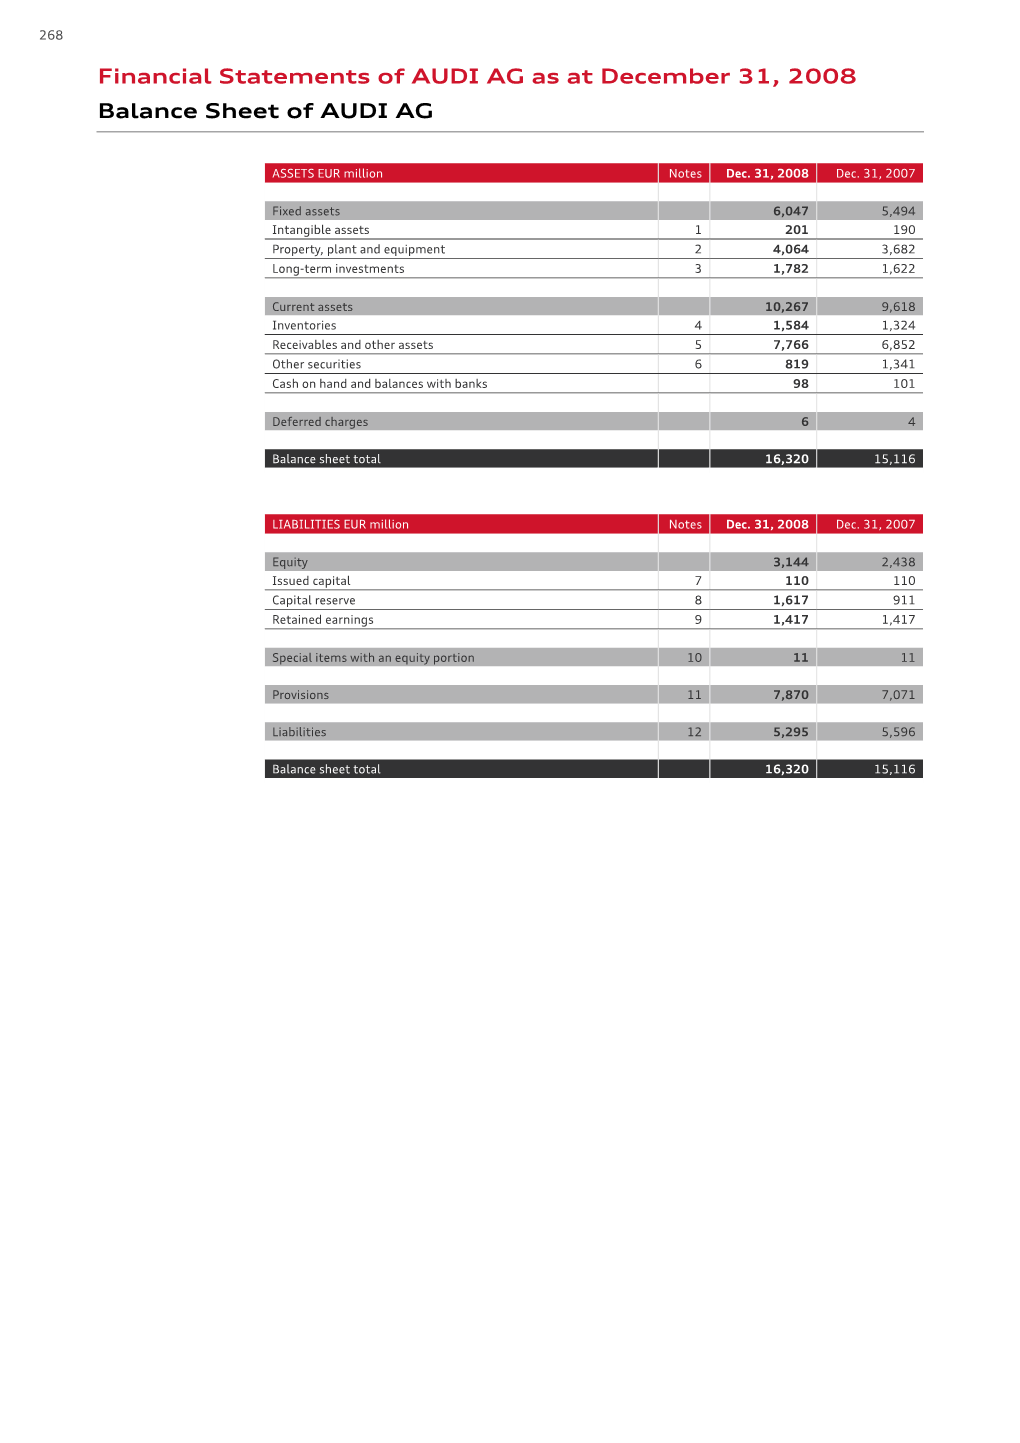 Financial Statements of AUDI AG As at December 31, 2008 Balance Sheet of AUDI AG